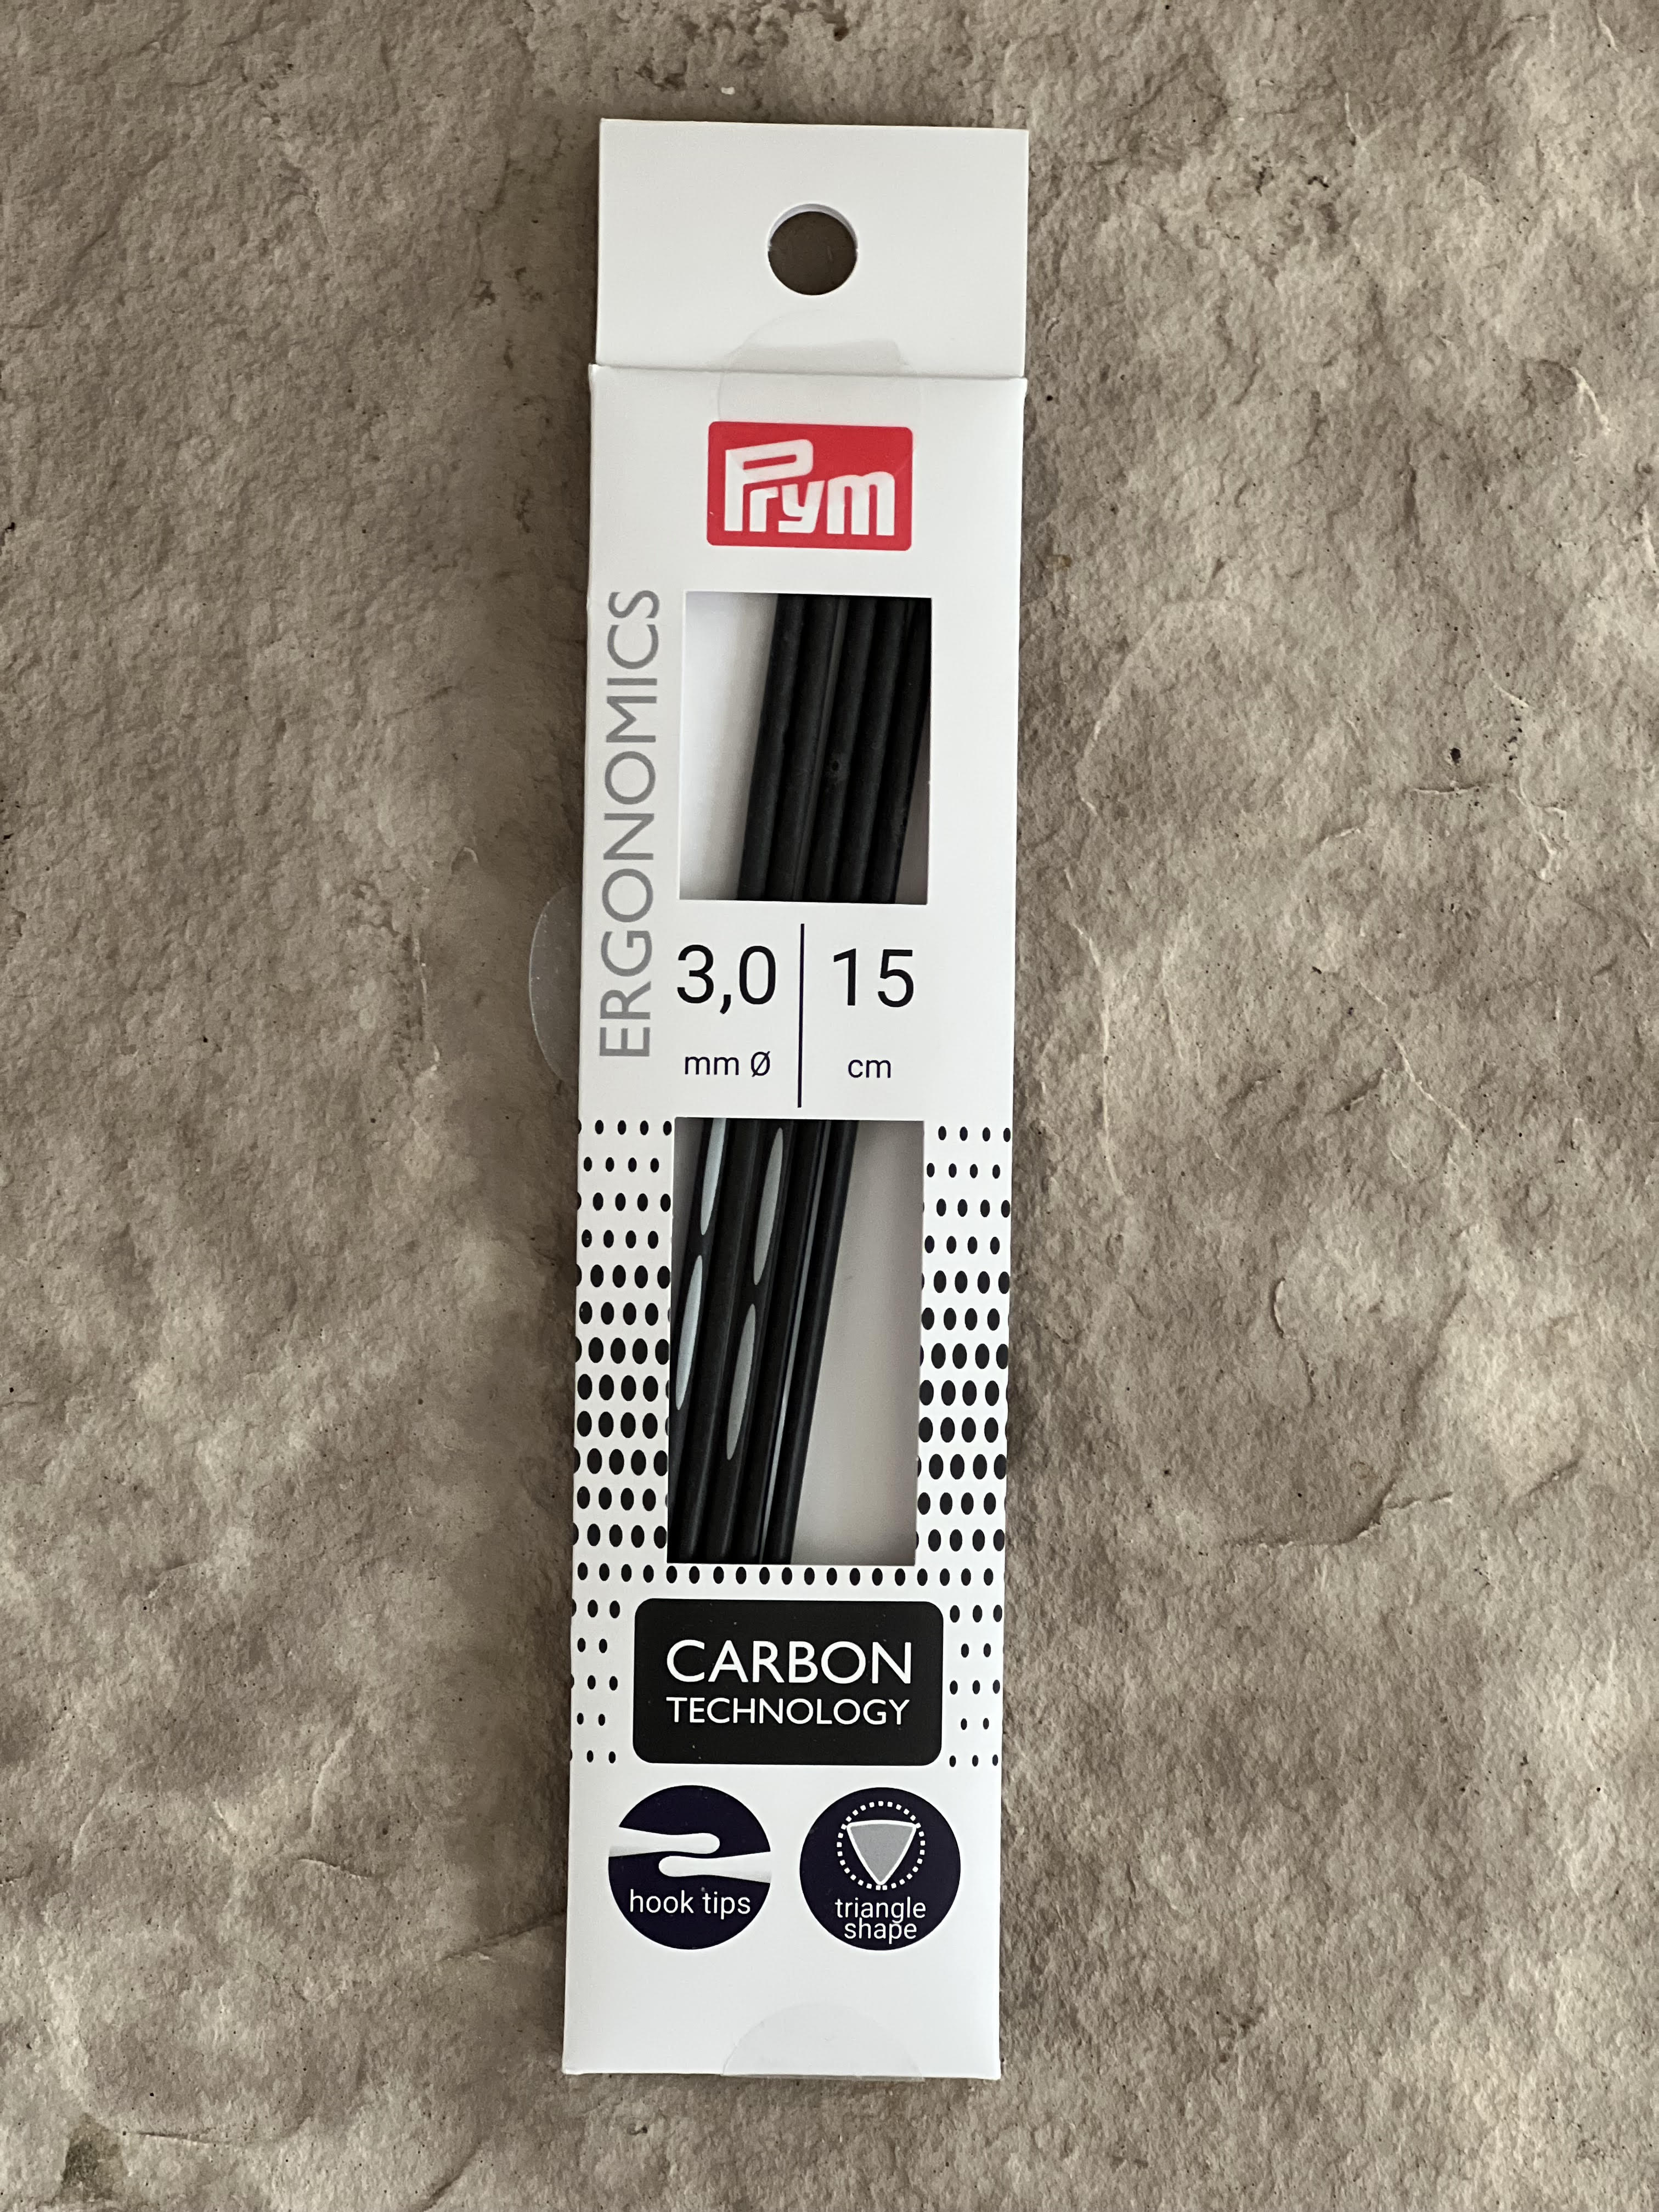 Prym 6 Double Point, US 6 (4mm) Knitting Needles, Alabaster White 5 Count